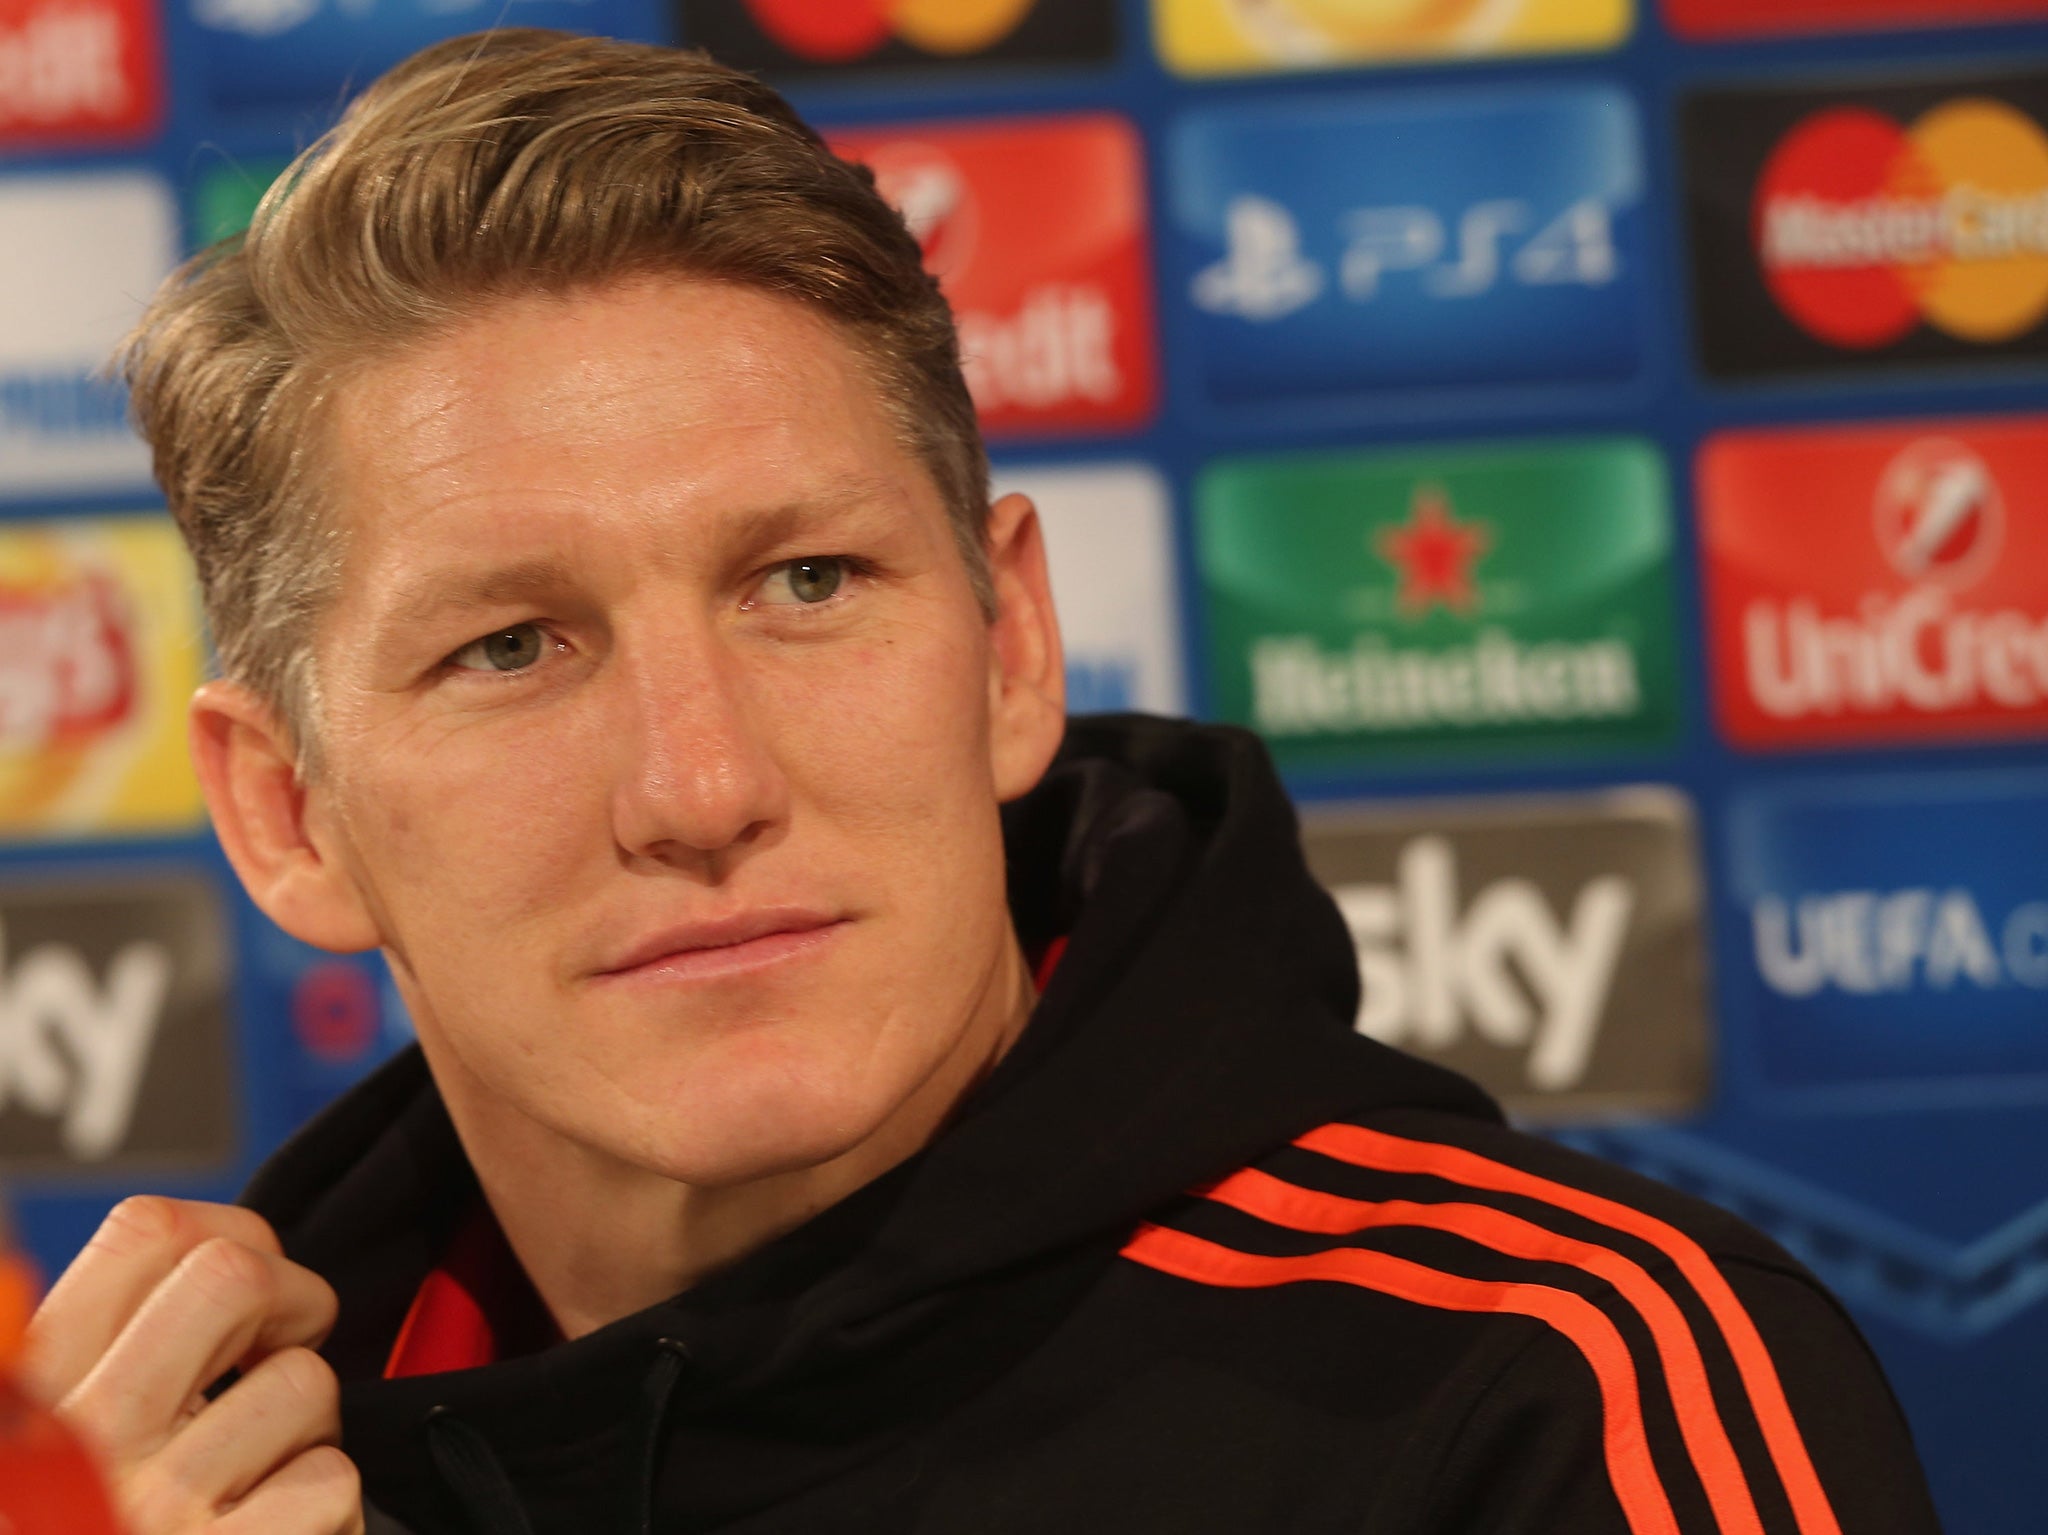 Schweinsteiger struggled for fitness and form during his first season at Old Trafford